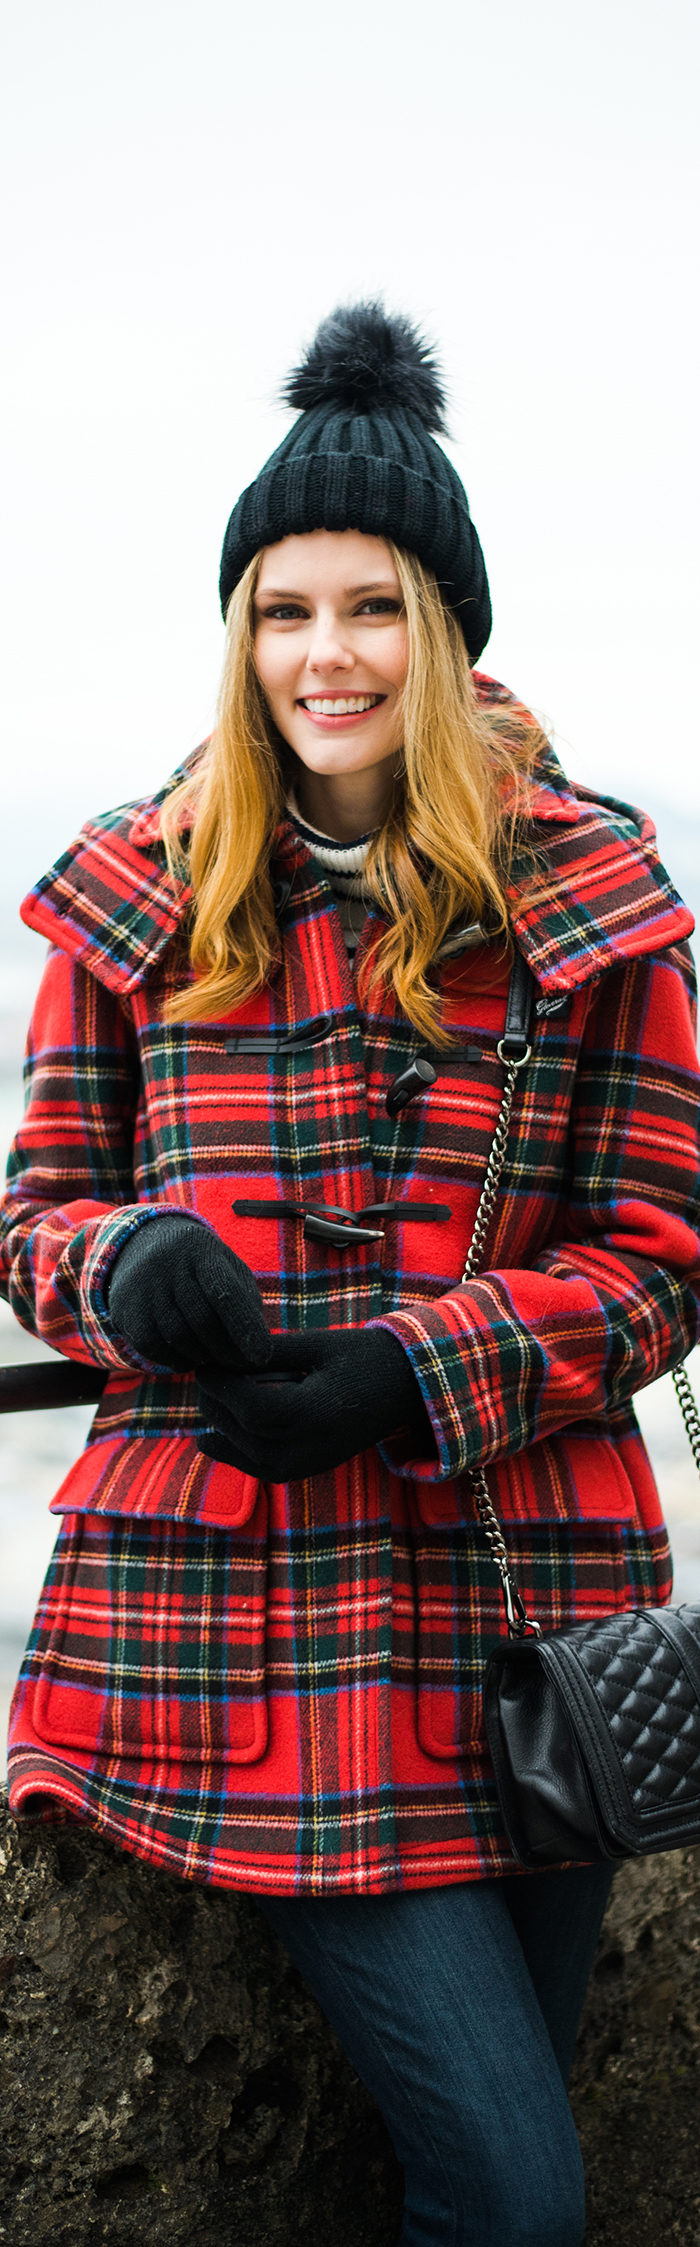 Alyssa Campanella of The A List blog shares the best plaid pieces for fall